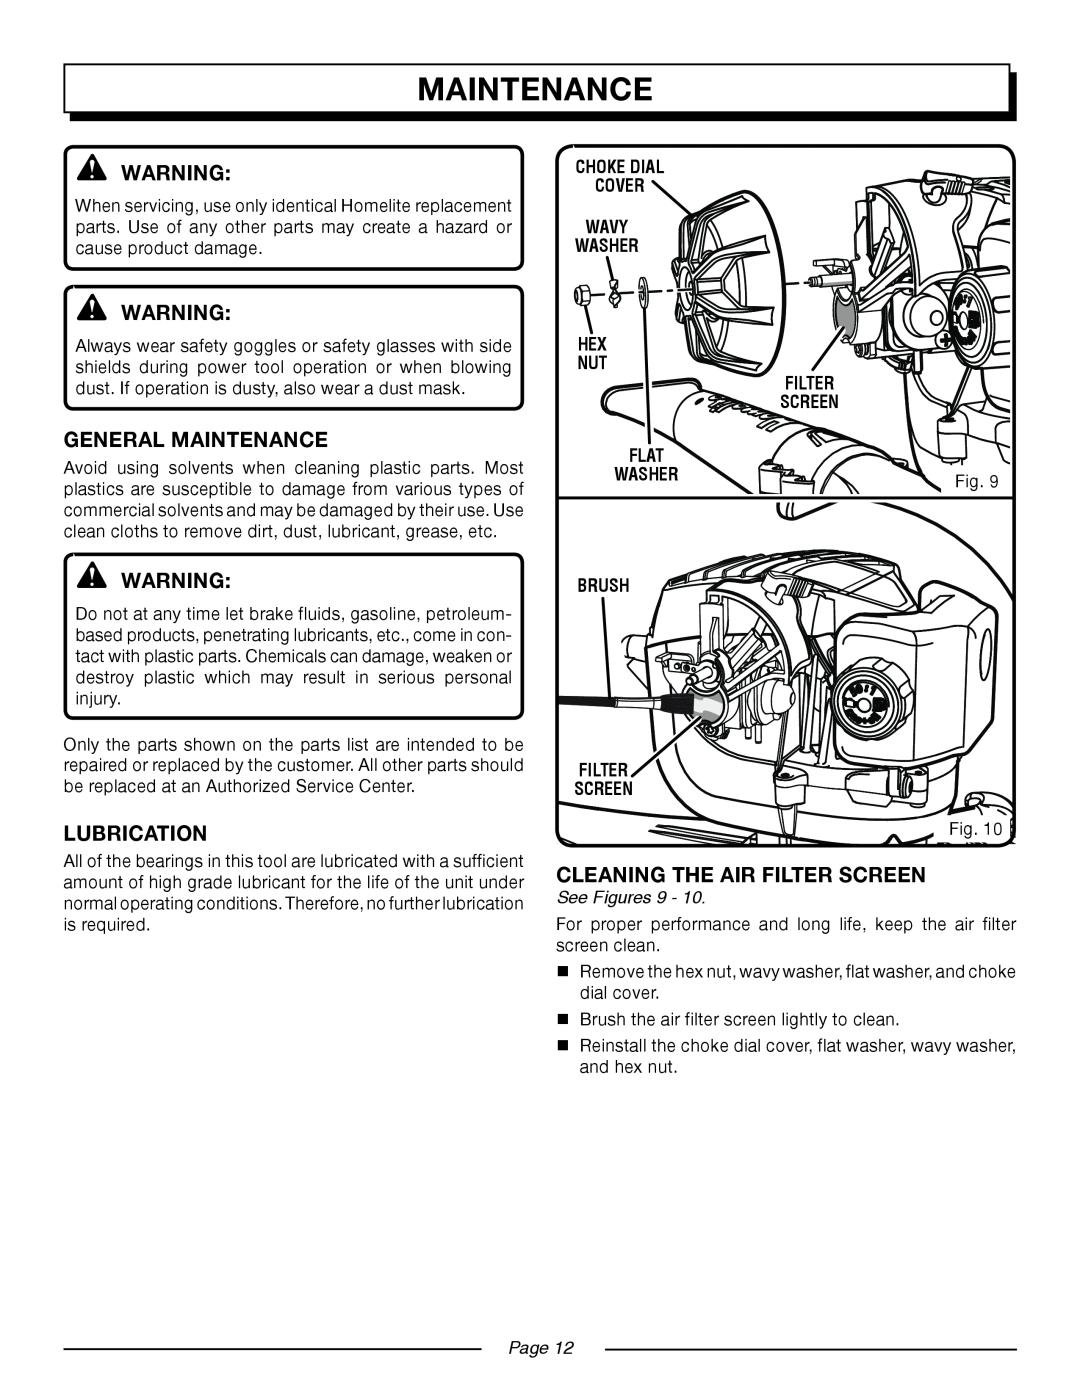 Homelite UT08520 manual maintenance, General Maintenance, Lubrication, Cleaning The Air Filter Screen, flat, washer, Page 